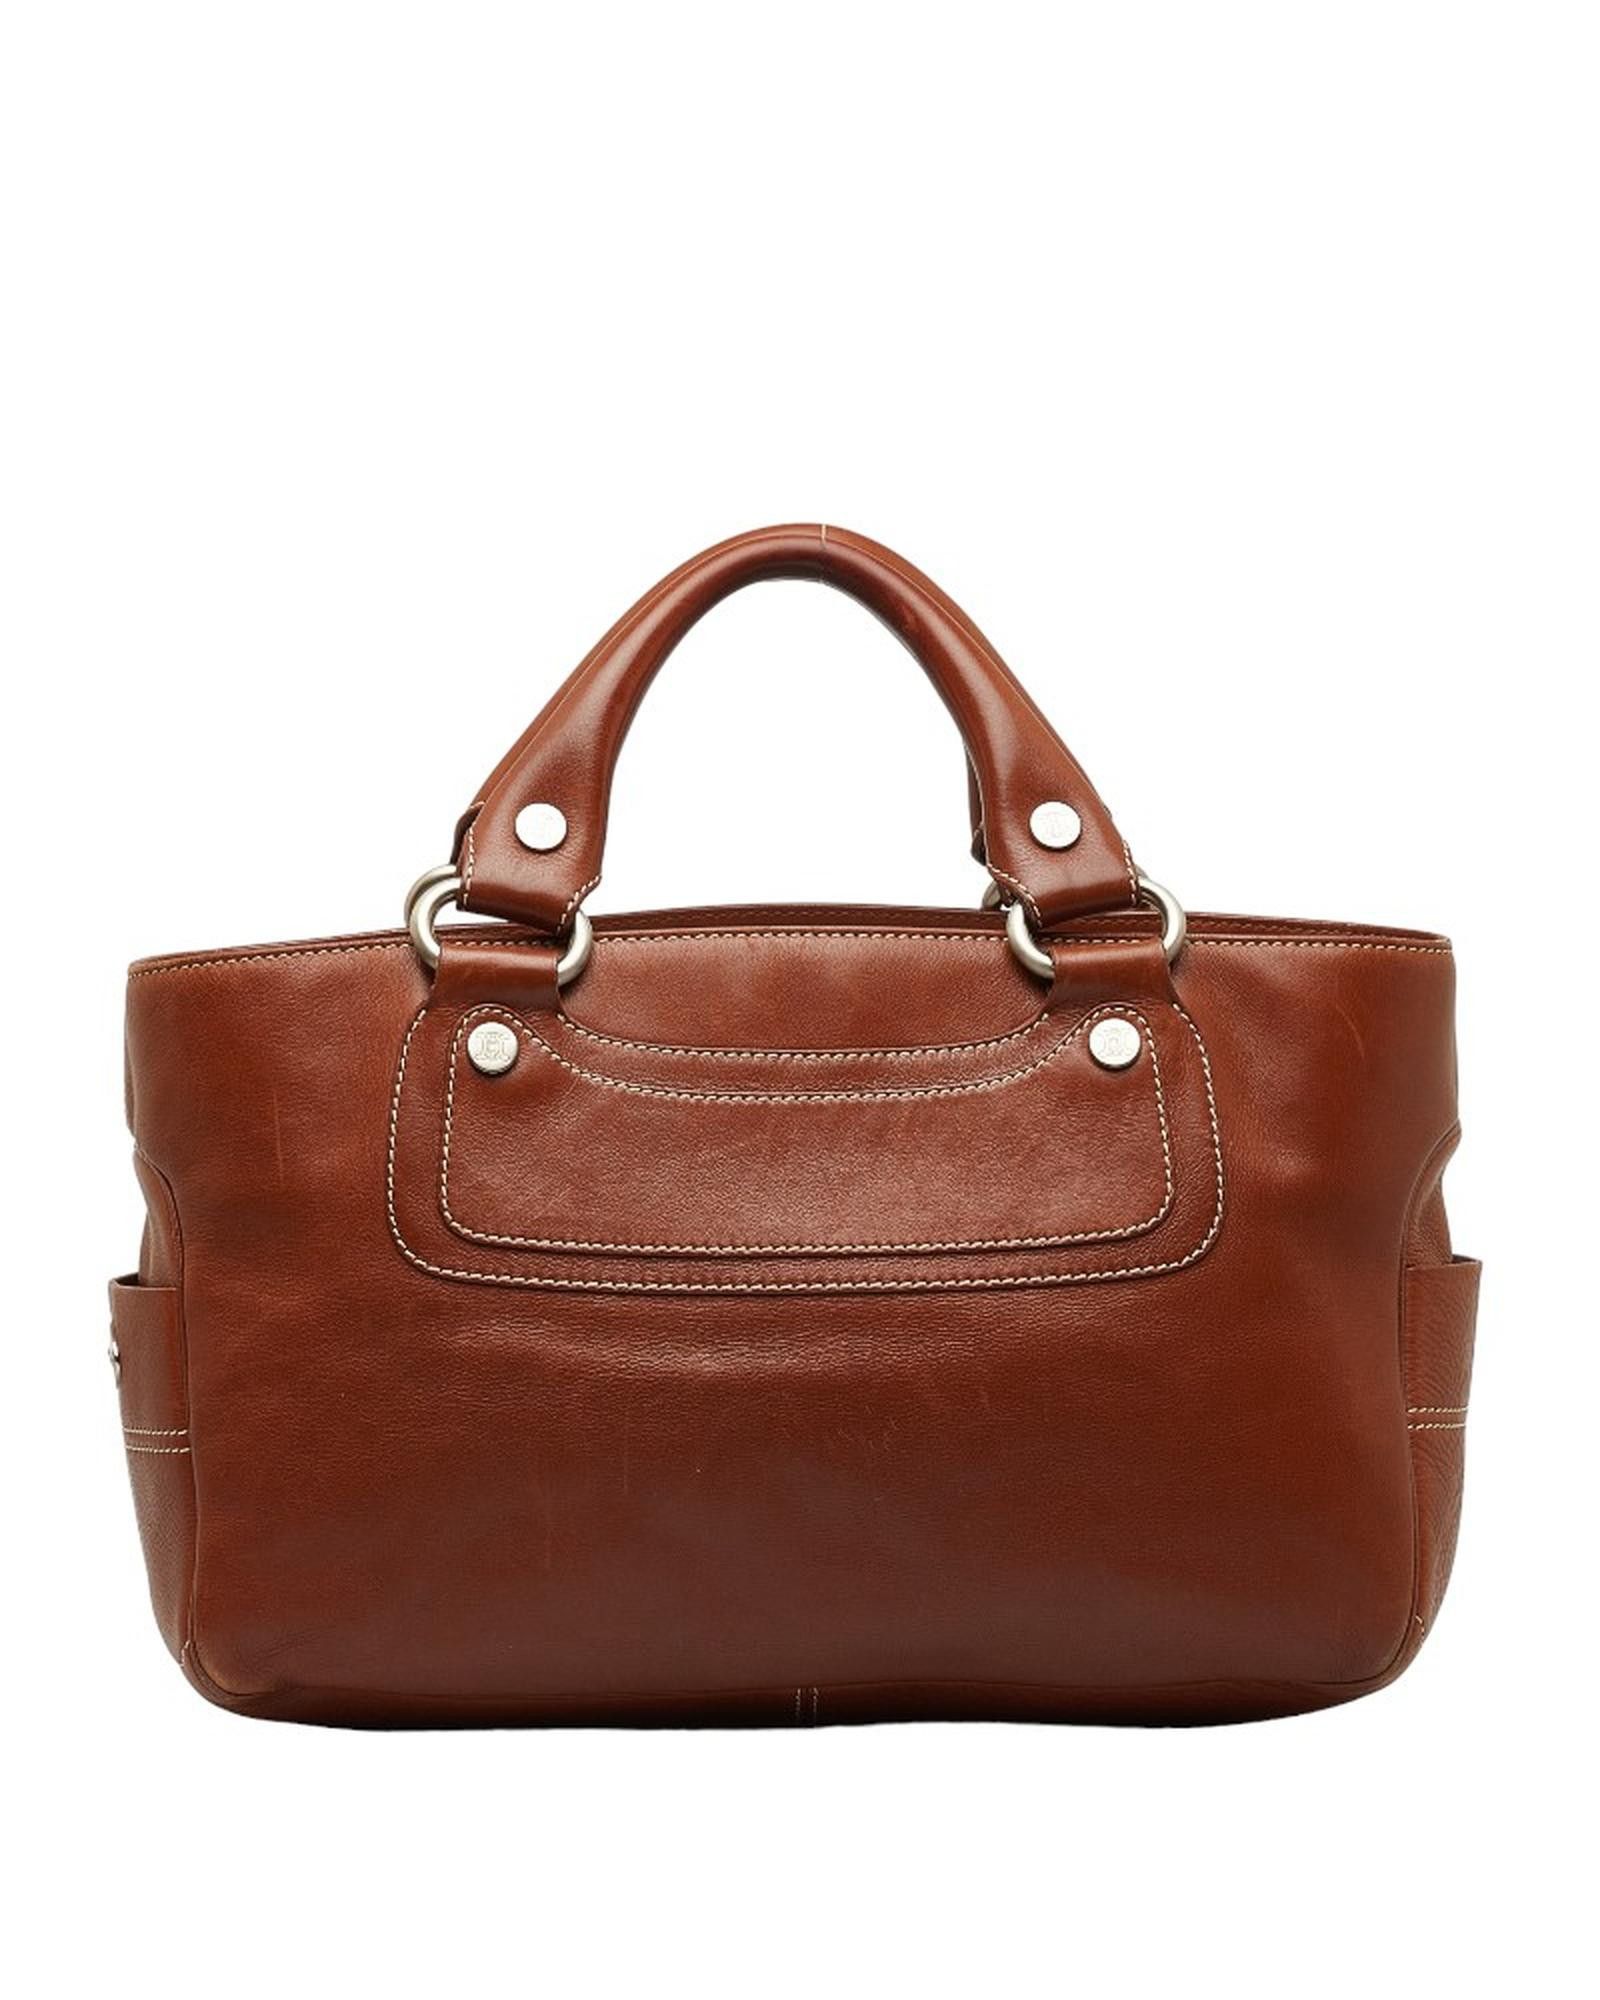 image of Celine Brown Leather Boogie Handbag In Ab Condition, Women's